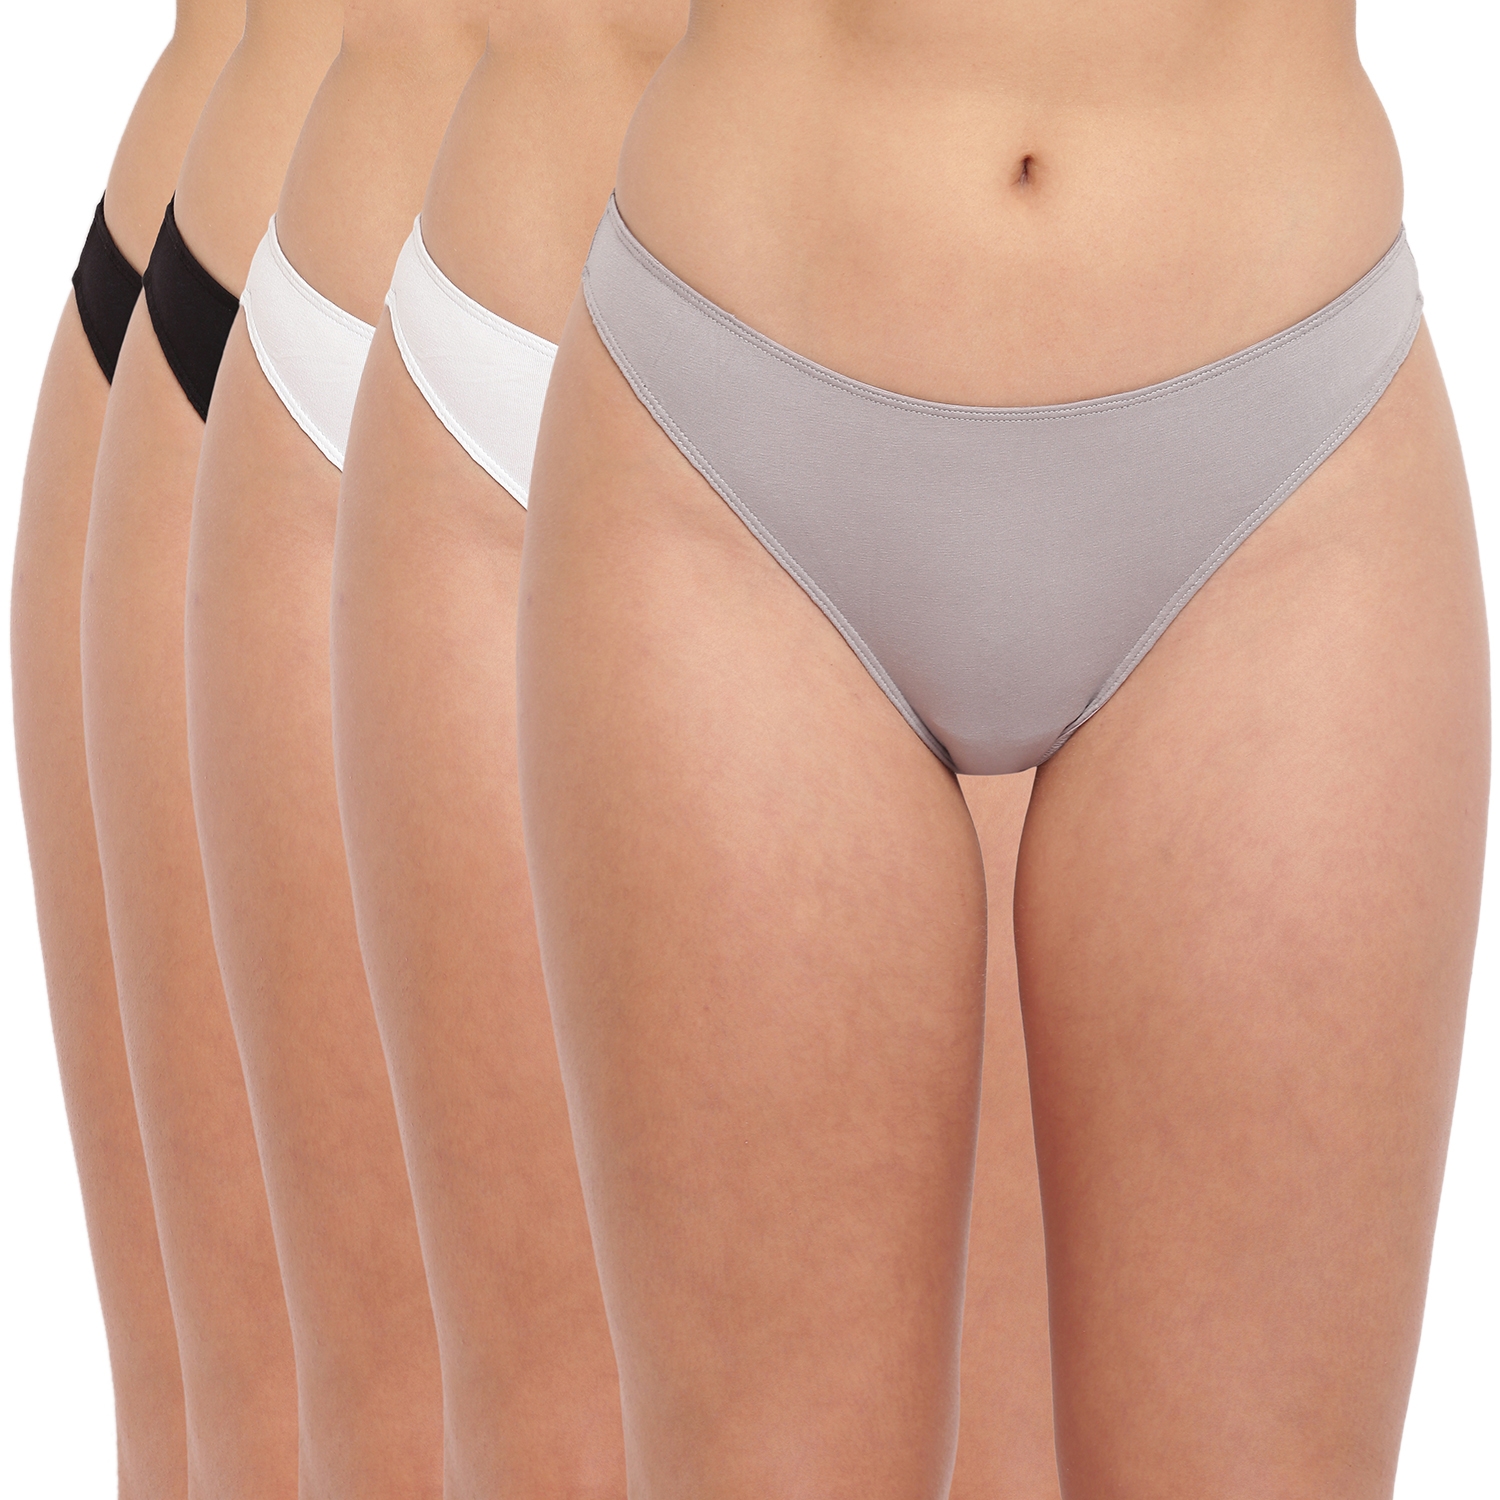 BASIICS by La Intimo | Black,Grey and White Spank Me Naughty Thong Pack of 5